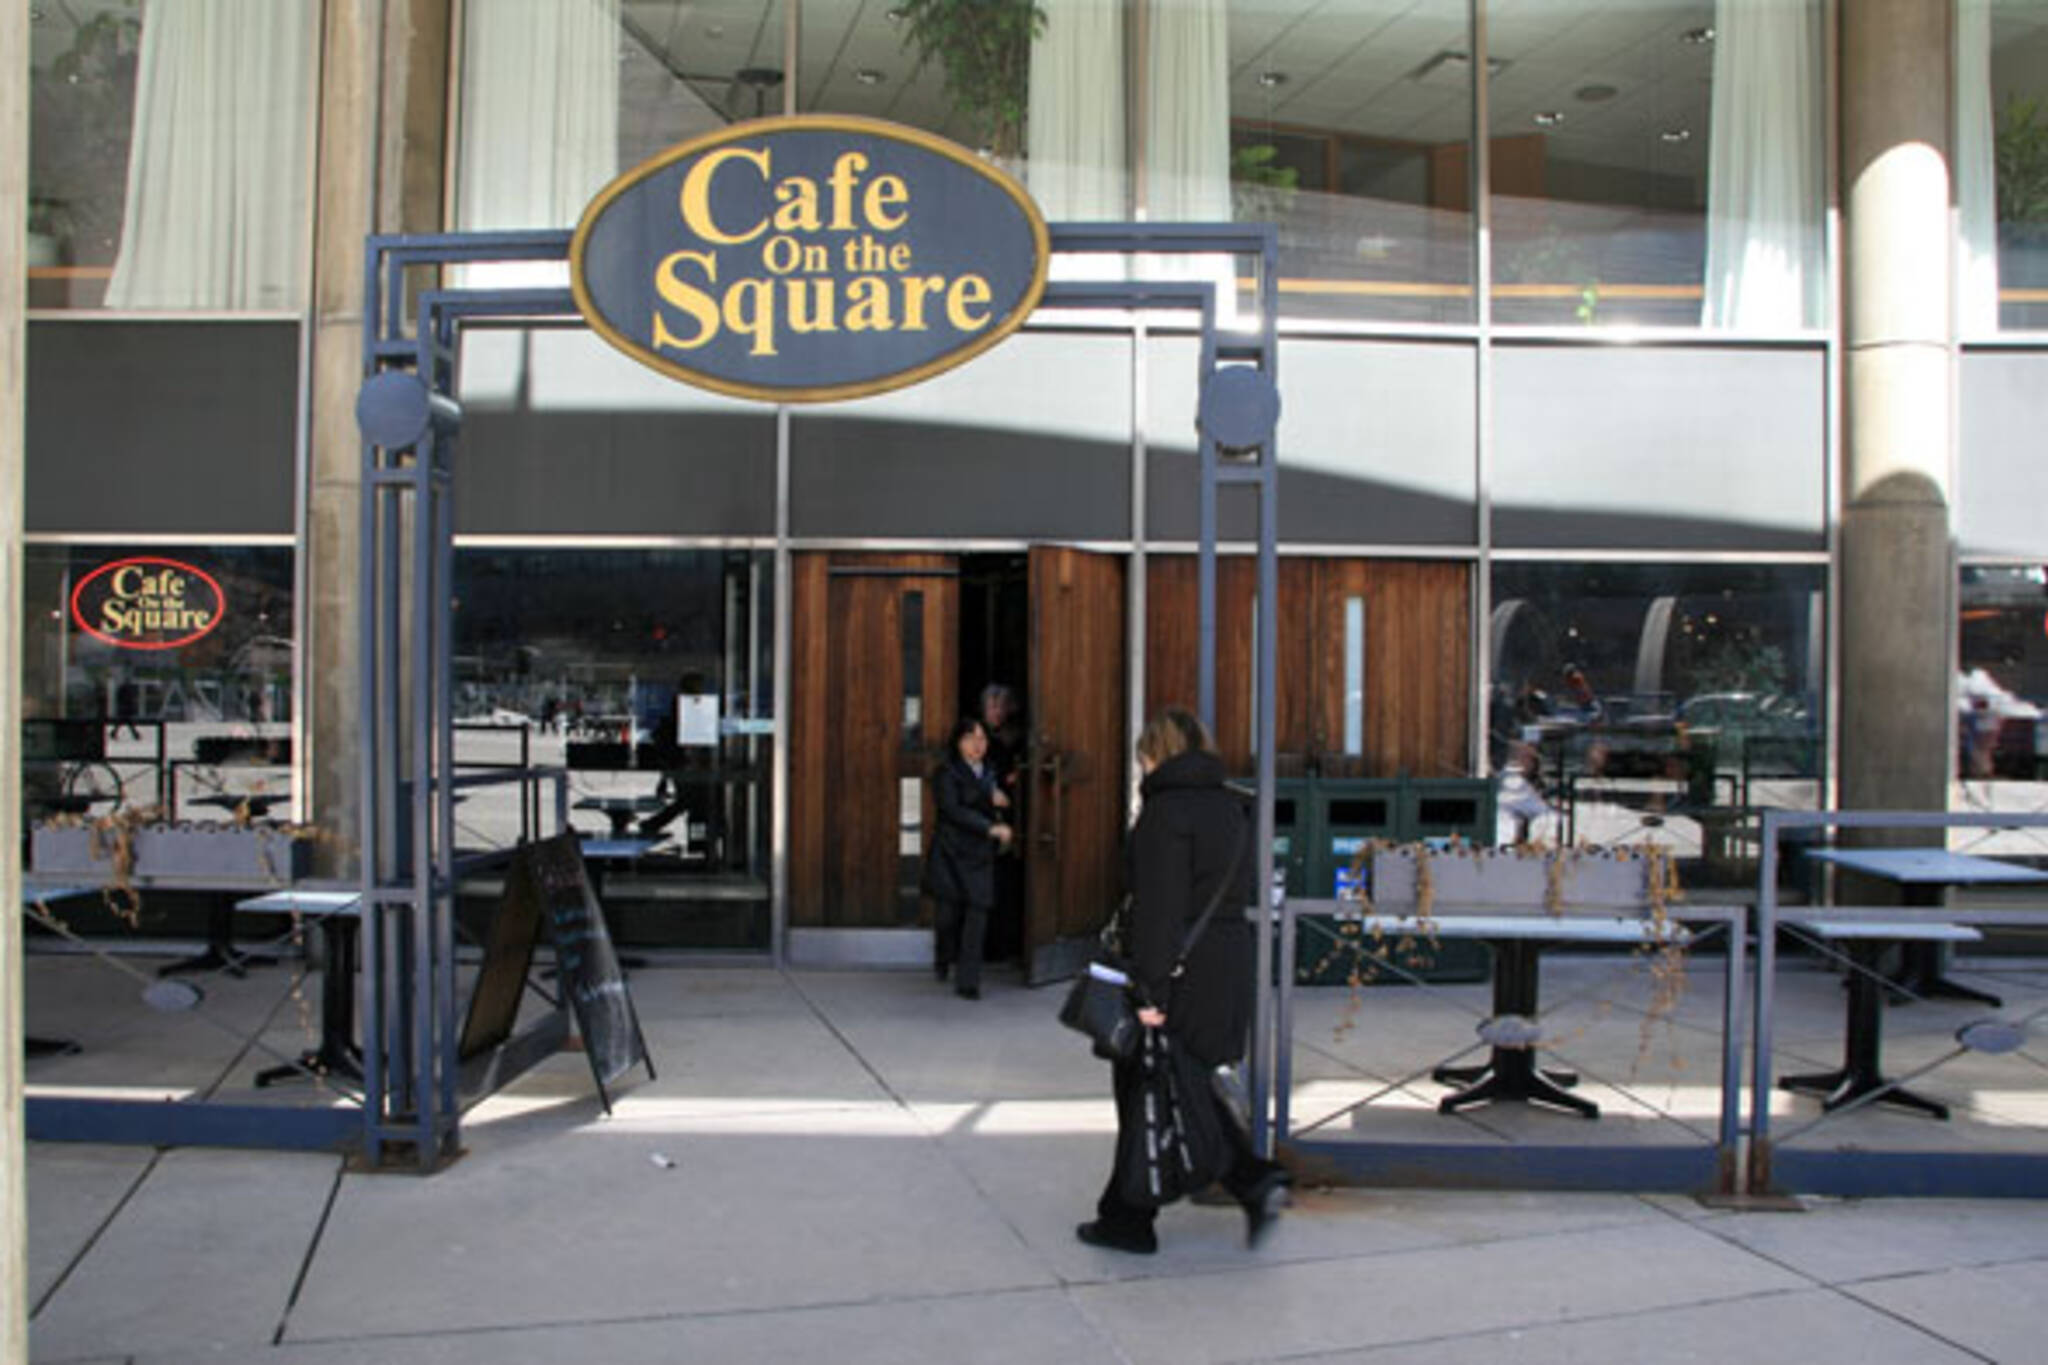 Cafe on the Square